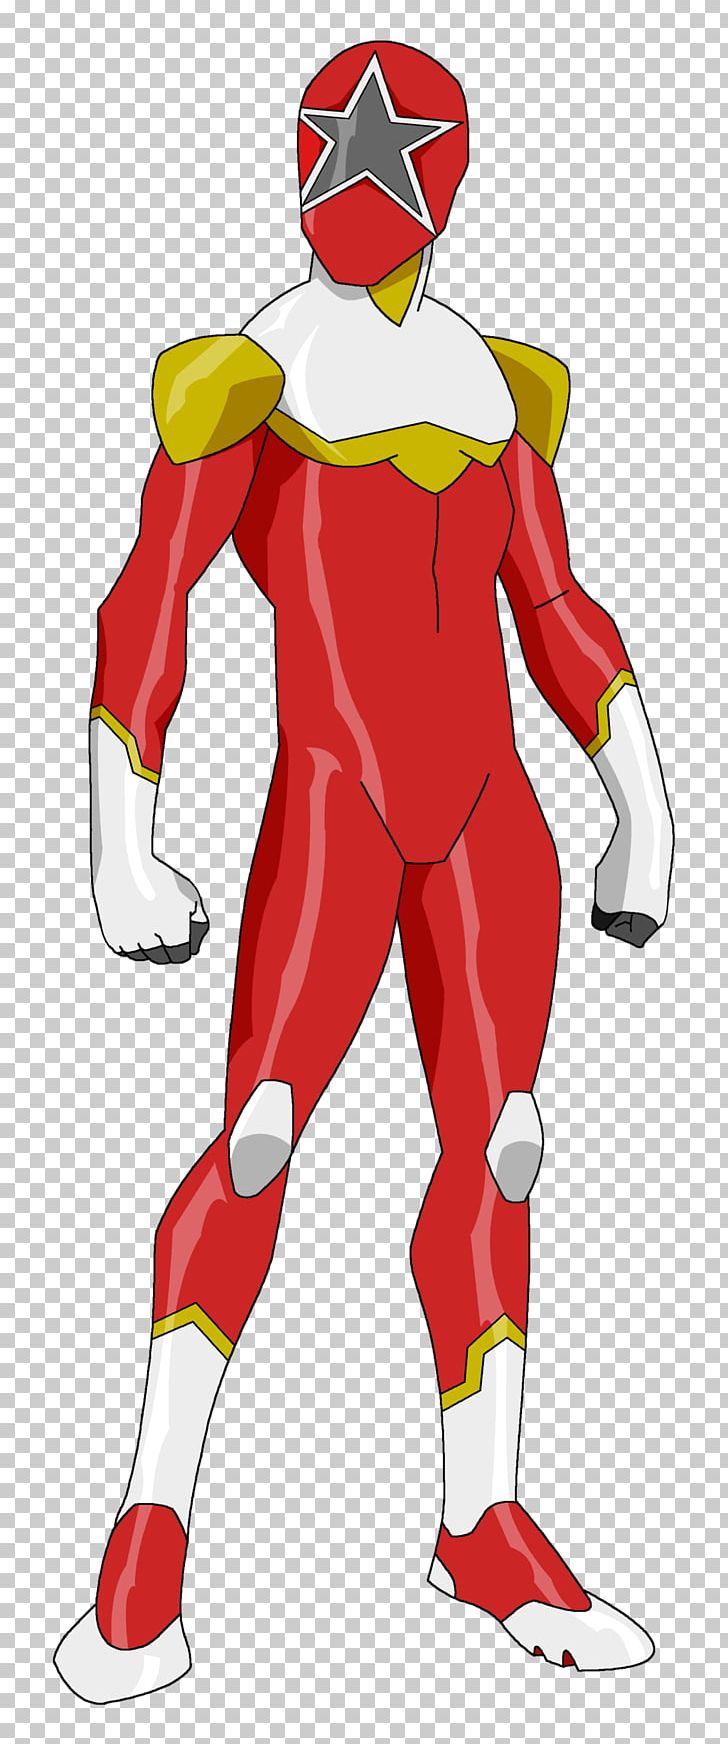 Red Ranger Jason Lee Scott Power Rangers Turbo Power Rangers Wild Force Power Rangers S.P.D. PNG, Clipart, Cartoon, Fictional Character, Material, Miscellaneous, Others Free PNG Download